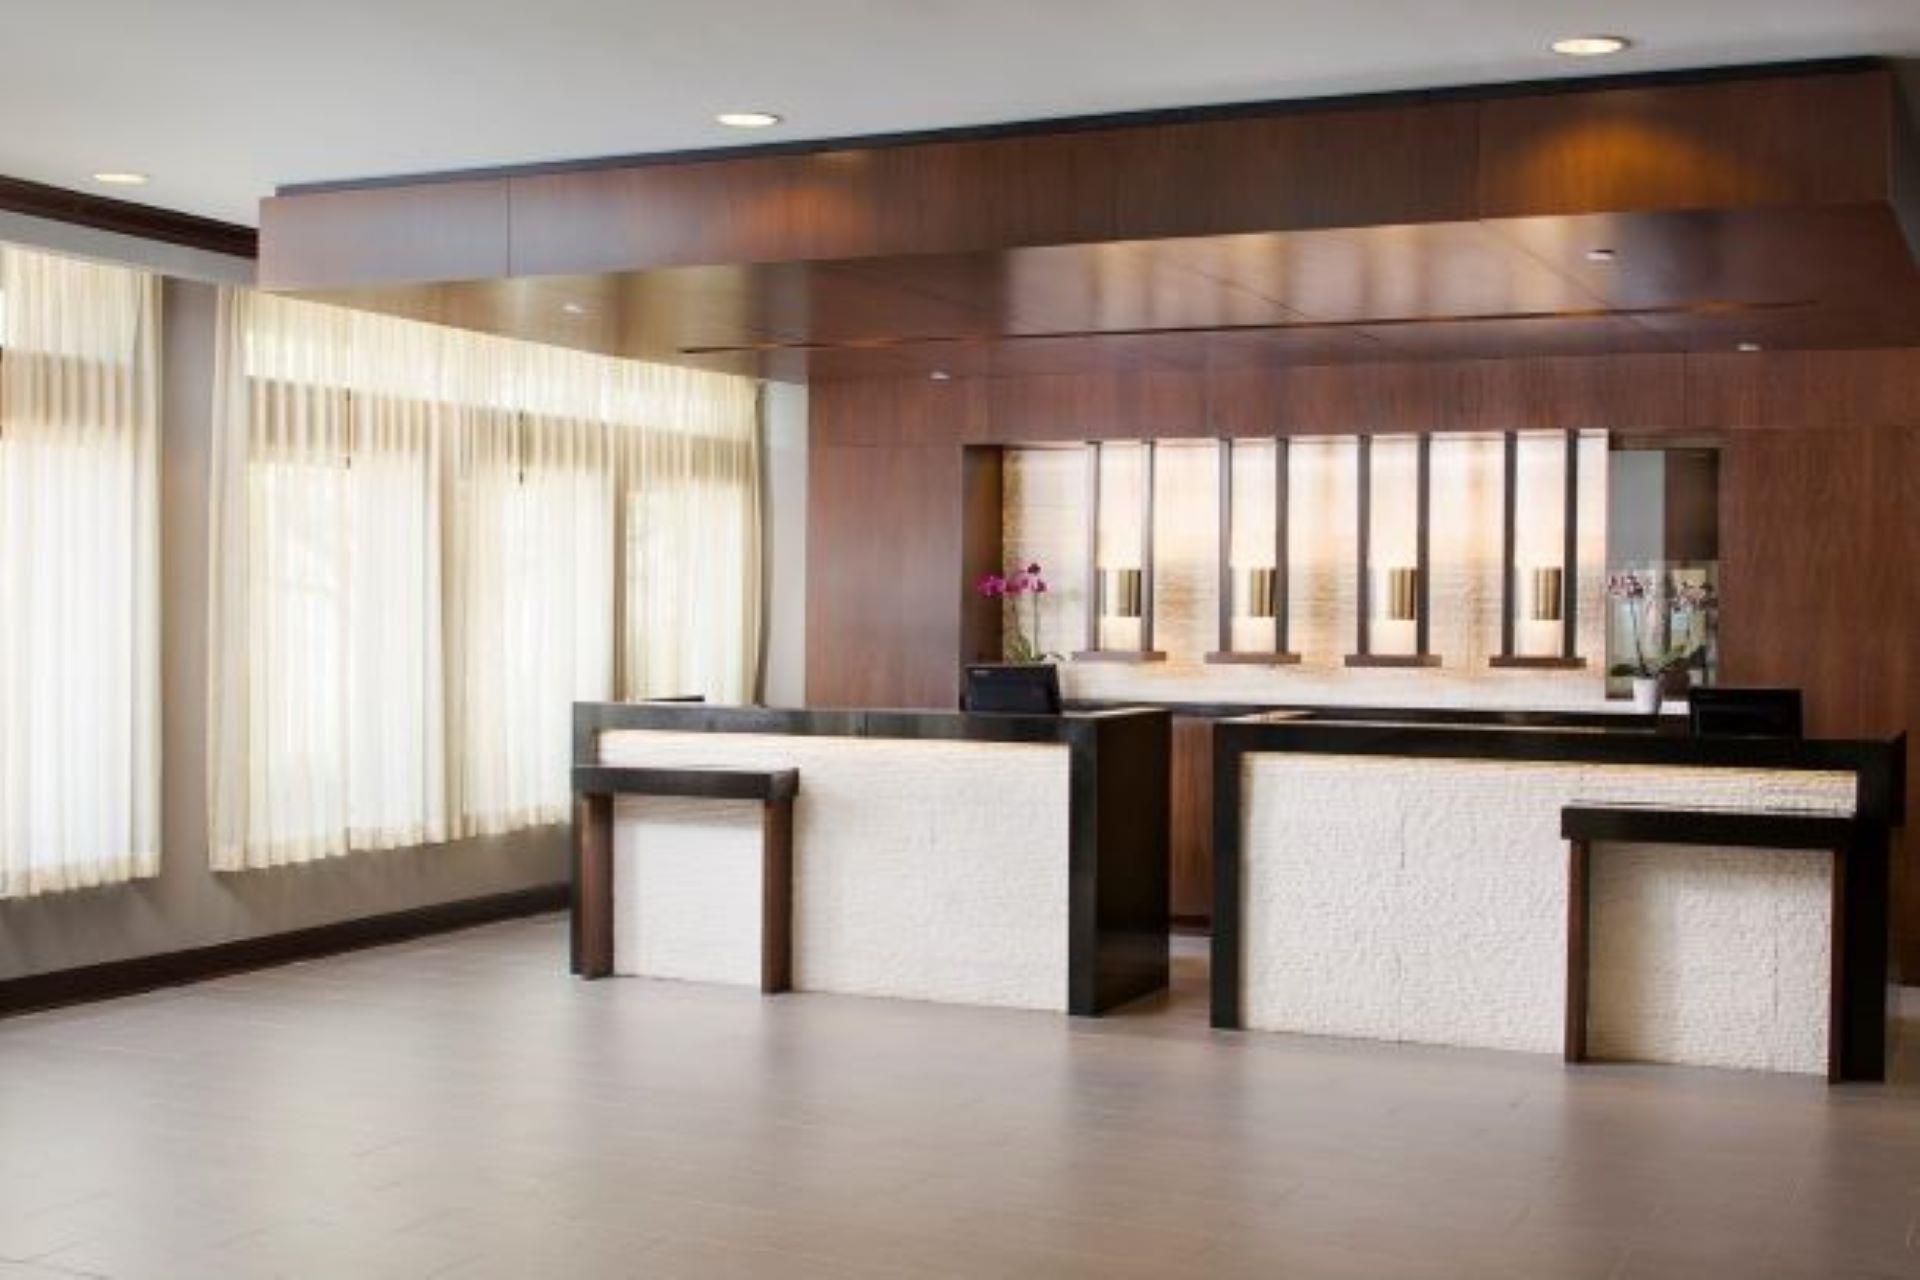 DoubleTree by Hilton Hotel Baltimore - BWI Airport in Linthicum, MD